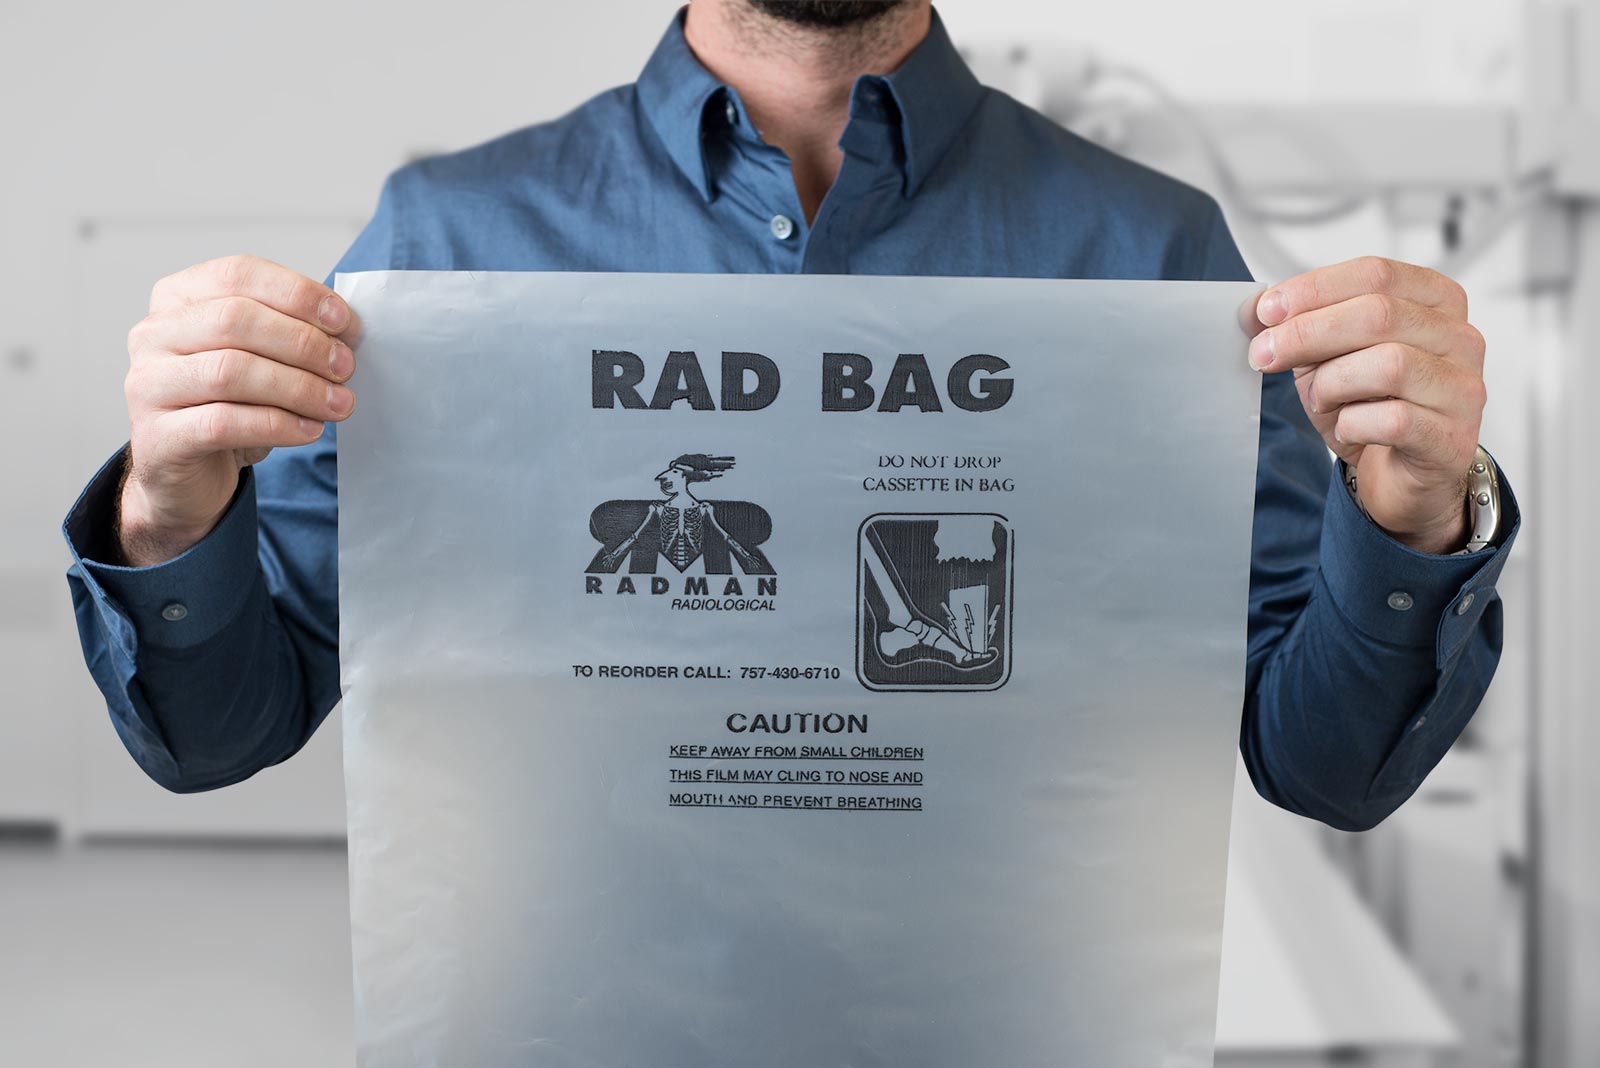 Rad Bag x-ray cassette features